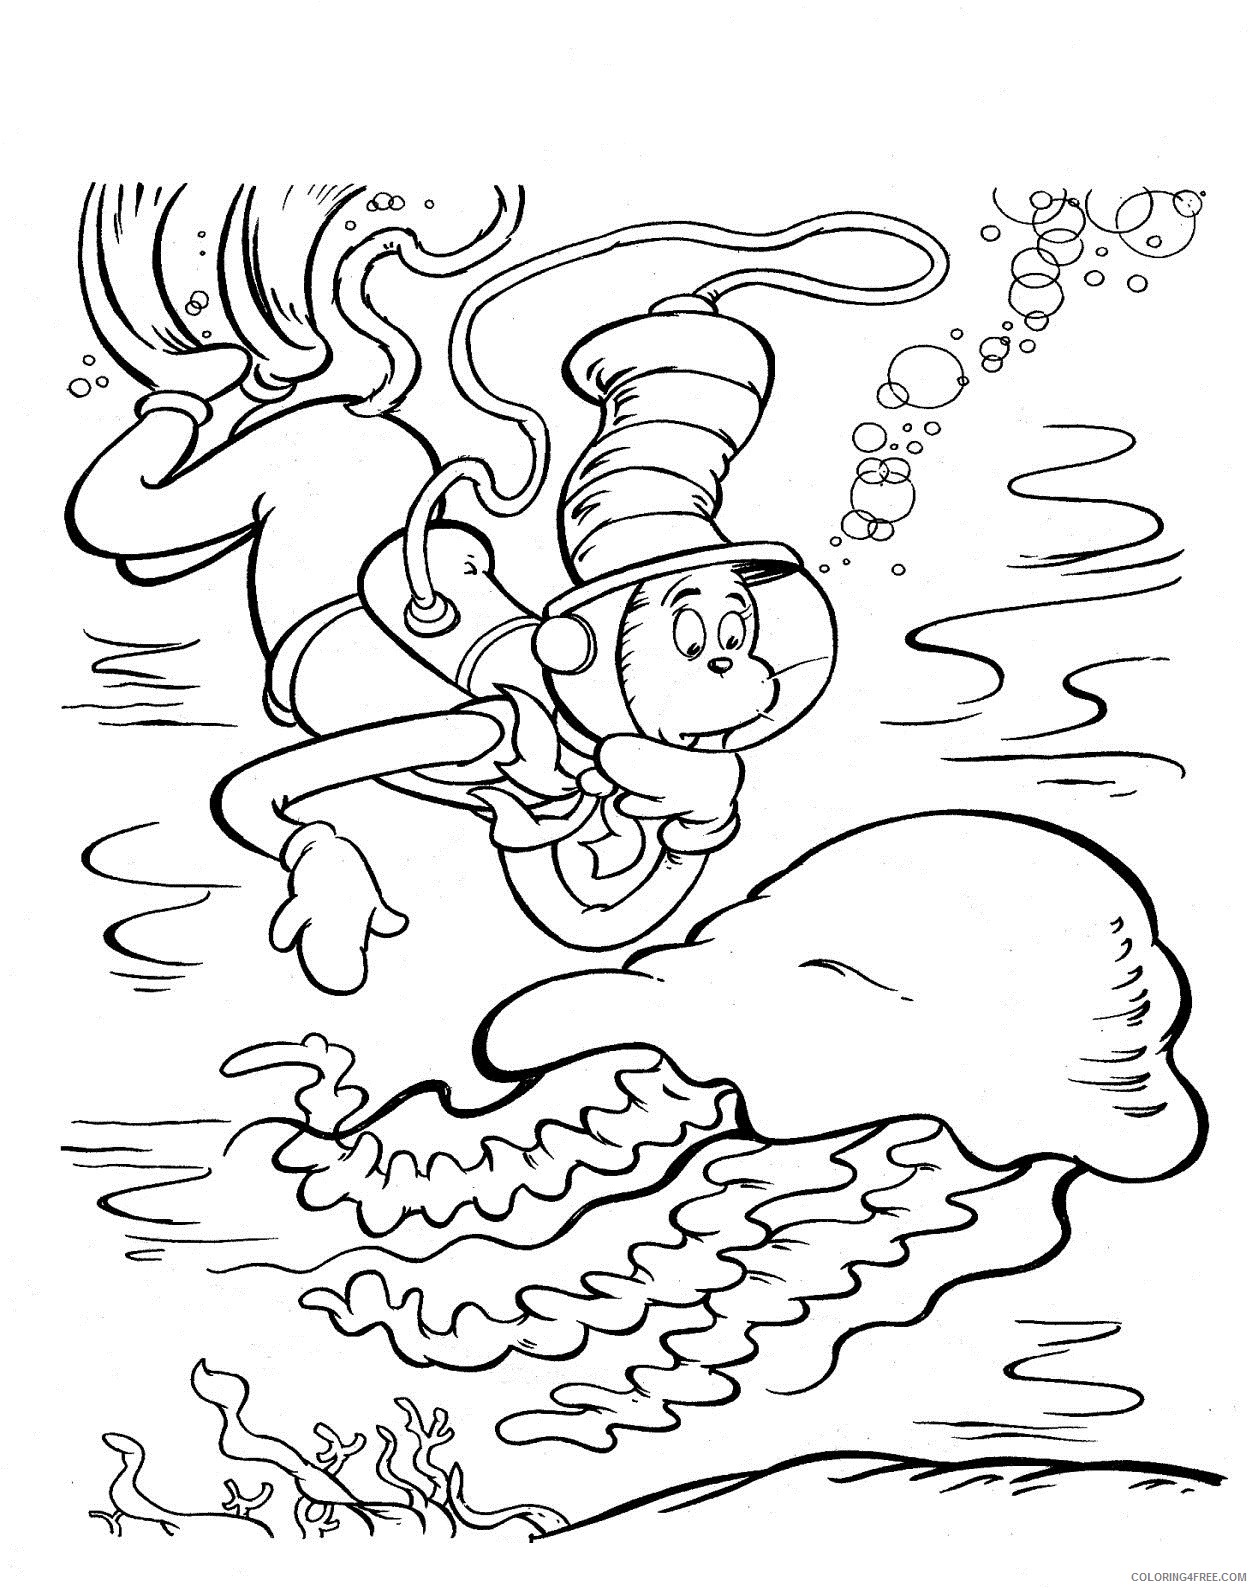 The Cat in the Hat Coloring Pages Cartoons Cat in the Hat Free Printable 2020 6414 Coloring4free